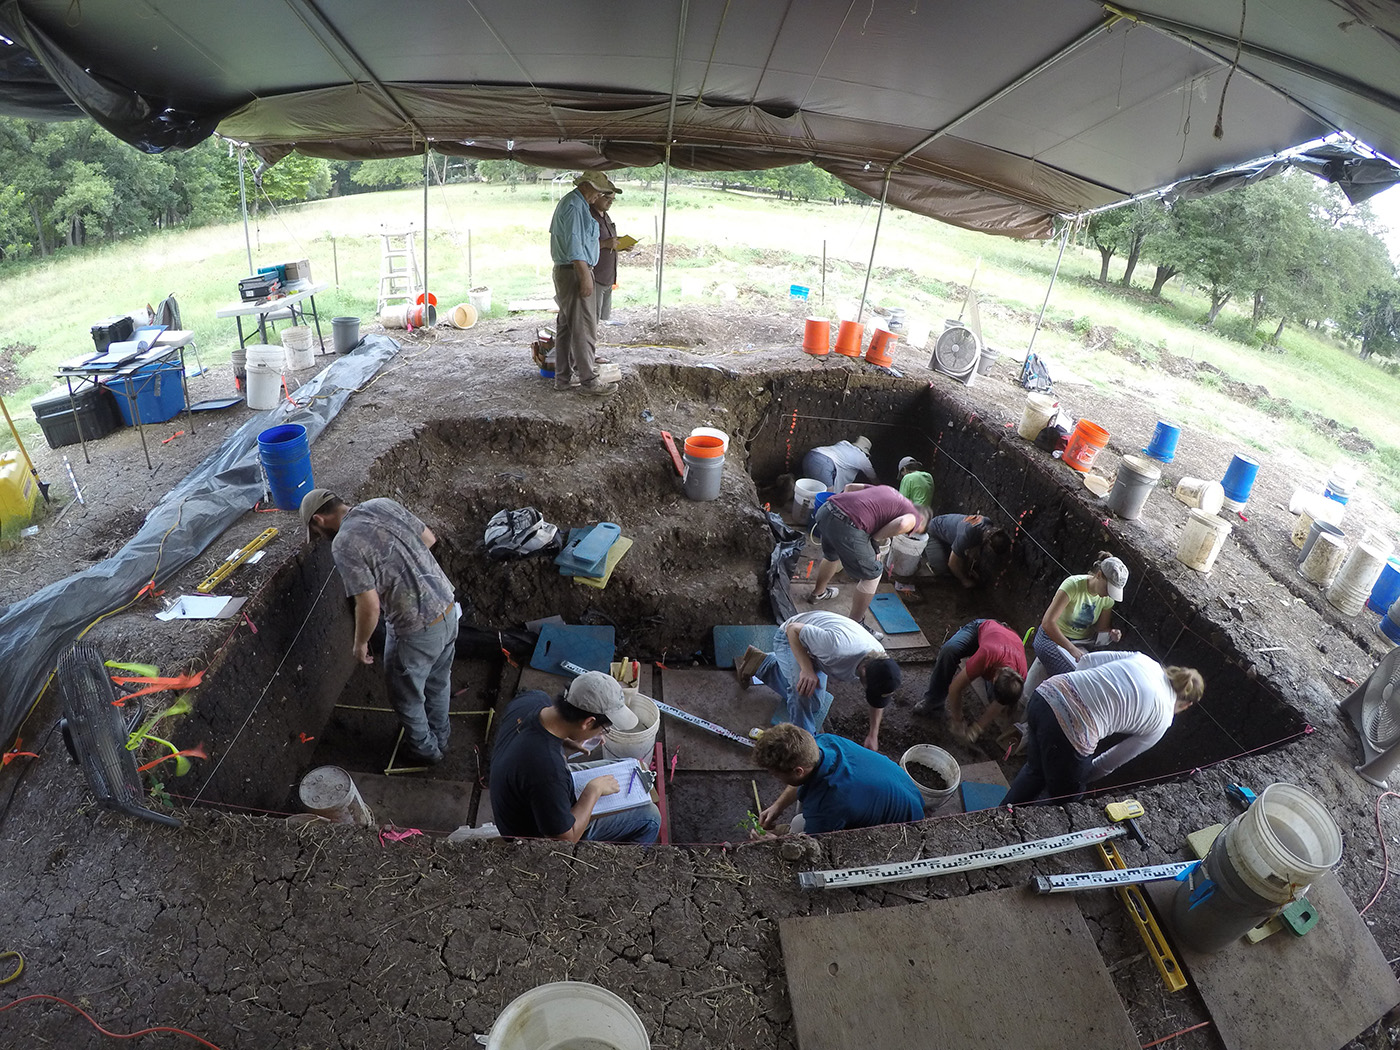 Texas A&amp;M archaeologist Michael Waters and Texas A&amp;M students work a dig at the Debra L. Friedkin site in central Texas